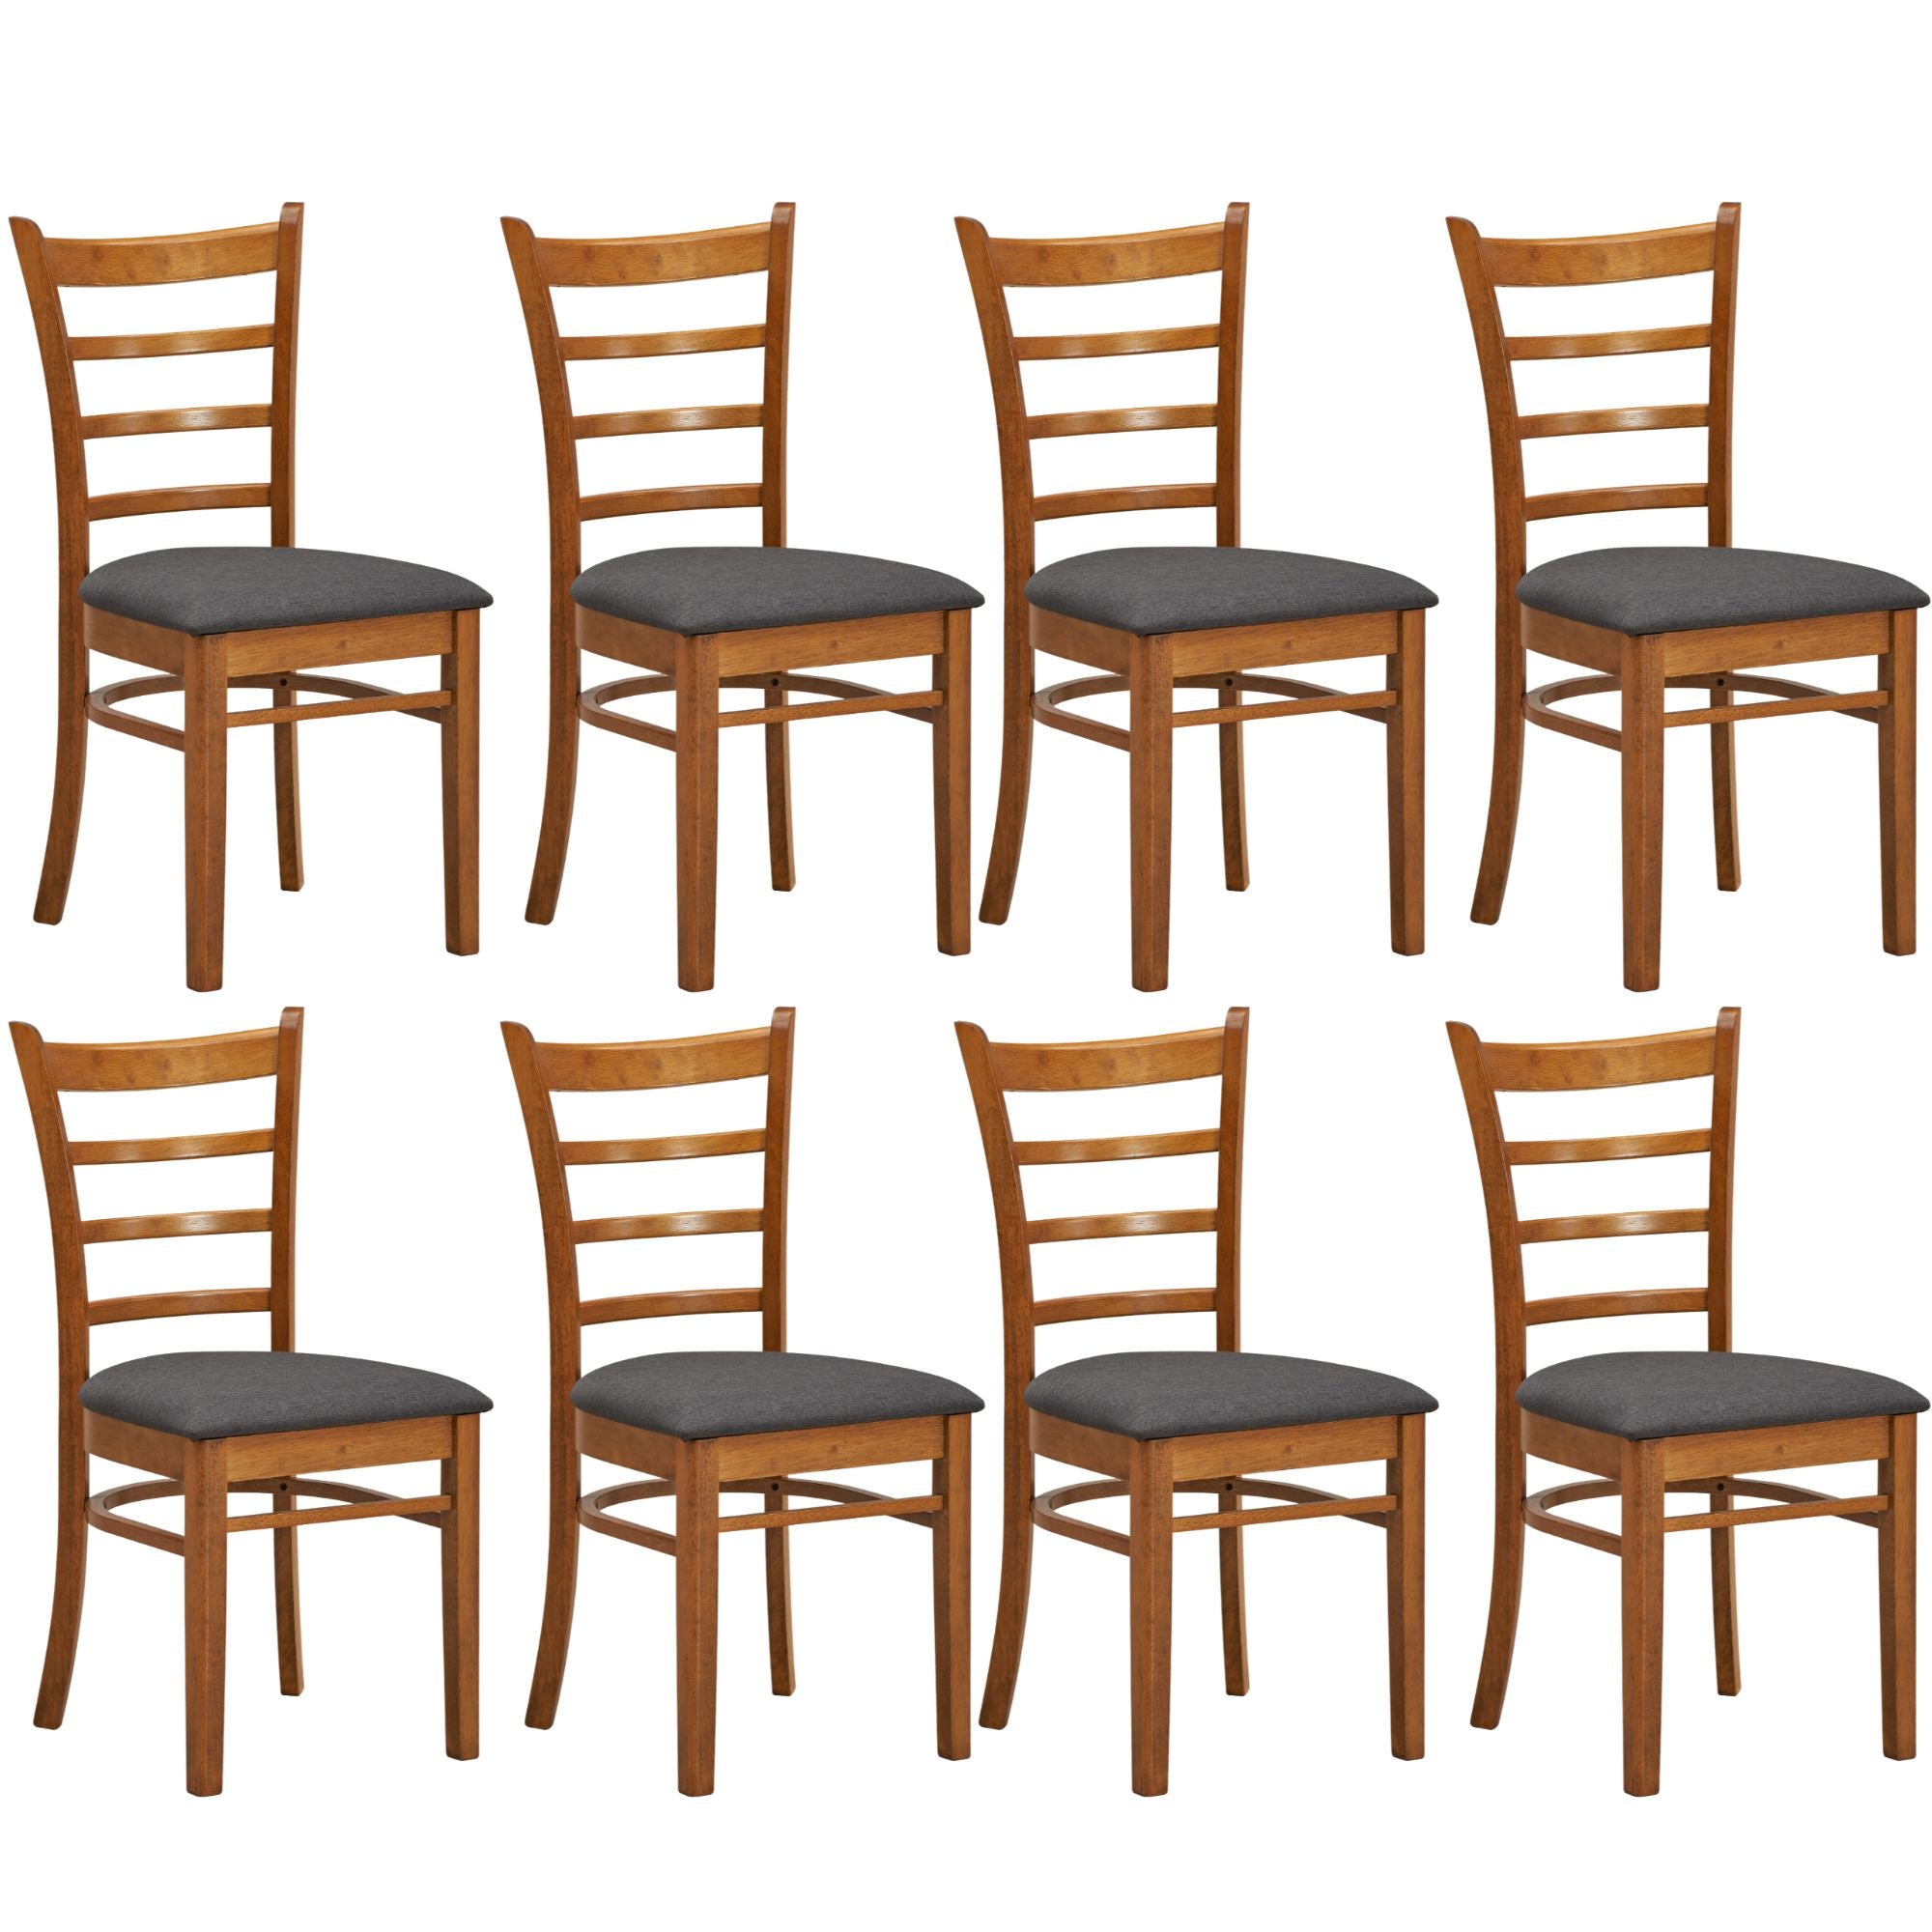 Linaria Dining Chair Set of 8 Crossback Solid Rubber Wood Fabric Seat - Walnut